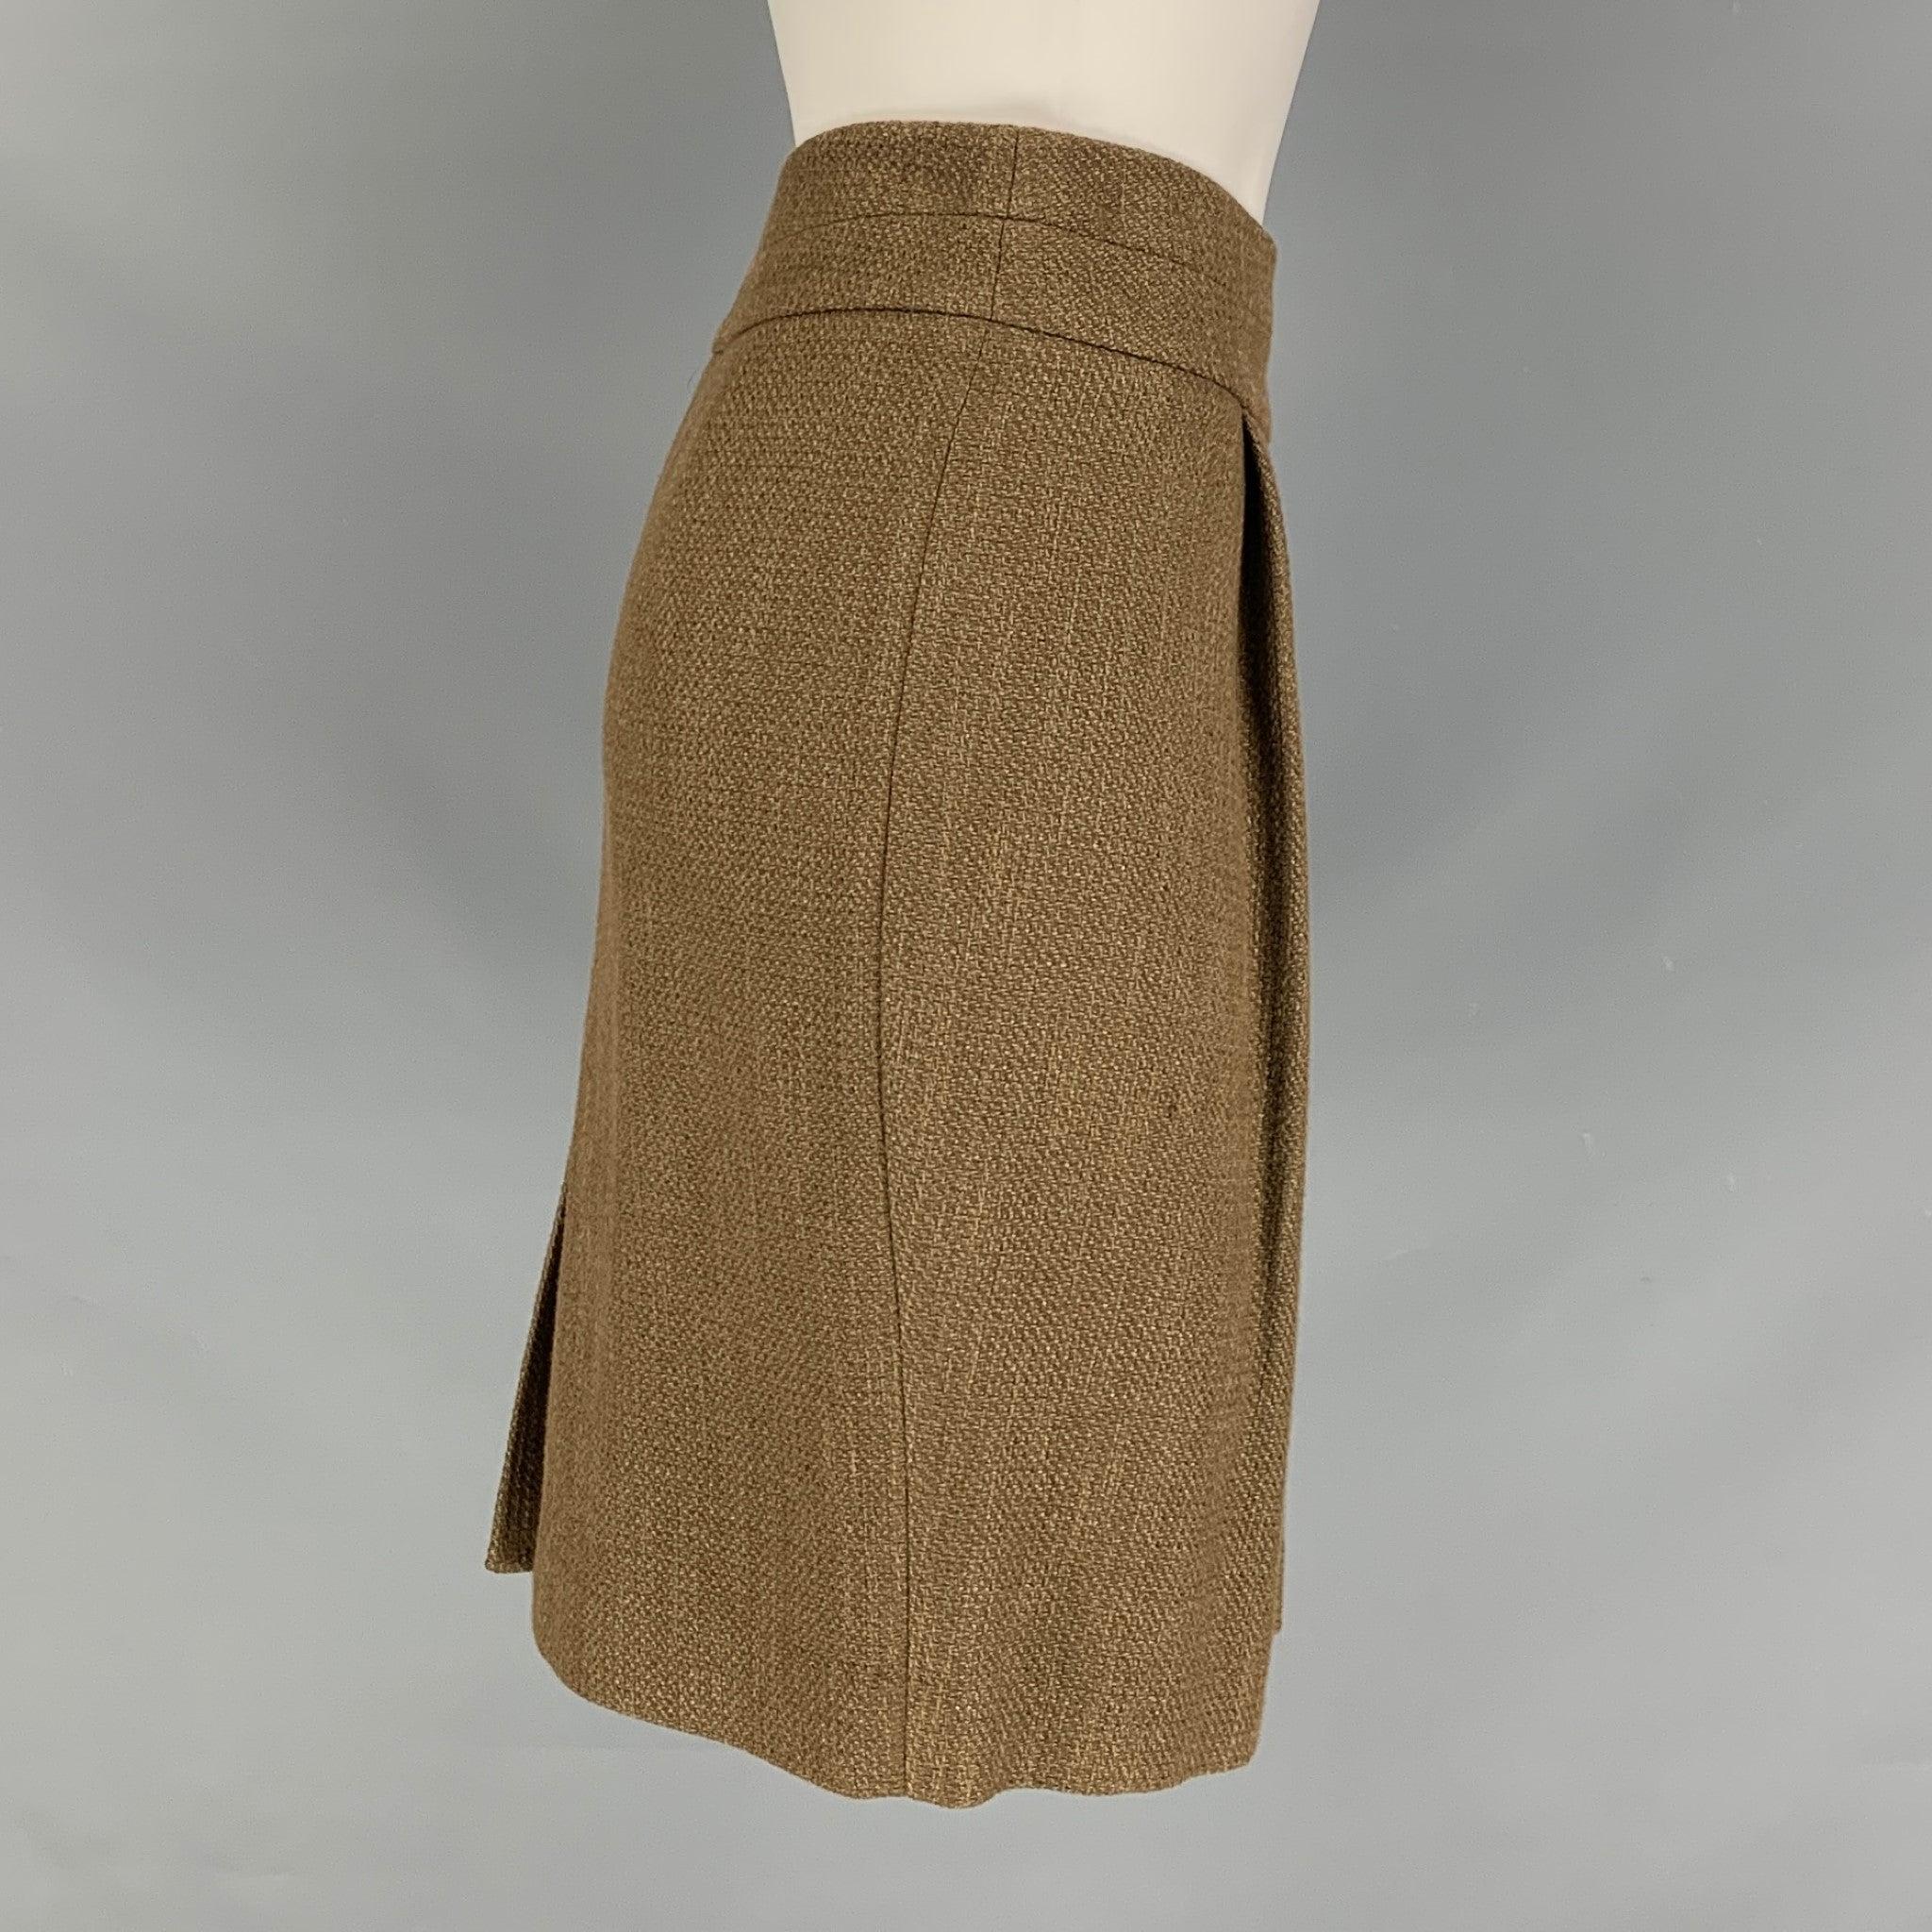 ETRO wide waistband short skirt comes in an olive wool blend featuring pleated detail at front and zip closure at center back. Made in Italy.Excellent Pre-Owned Condition.  

Marked:   38 IT 

Measurements: 
  Waist: 28 inches Hip:
33 inches Length: